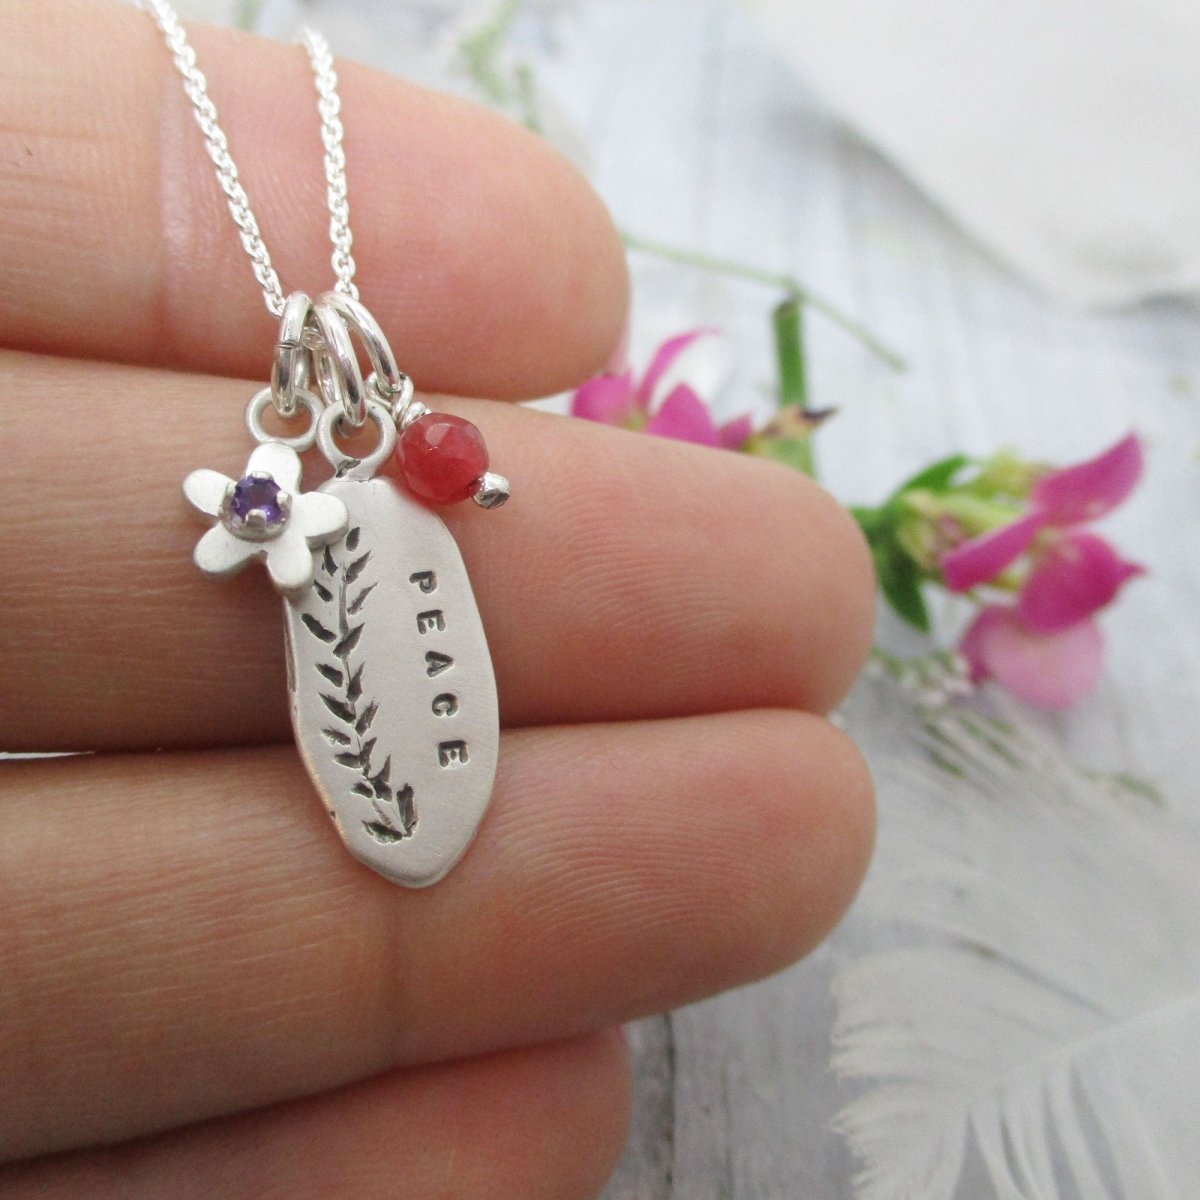 Personalized Raw Edge Vine Charm Necklace with Birthstones in Sterling Silver - Luxe Design Jewellery